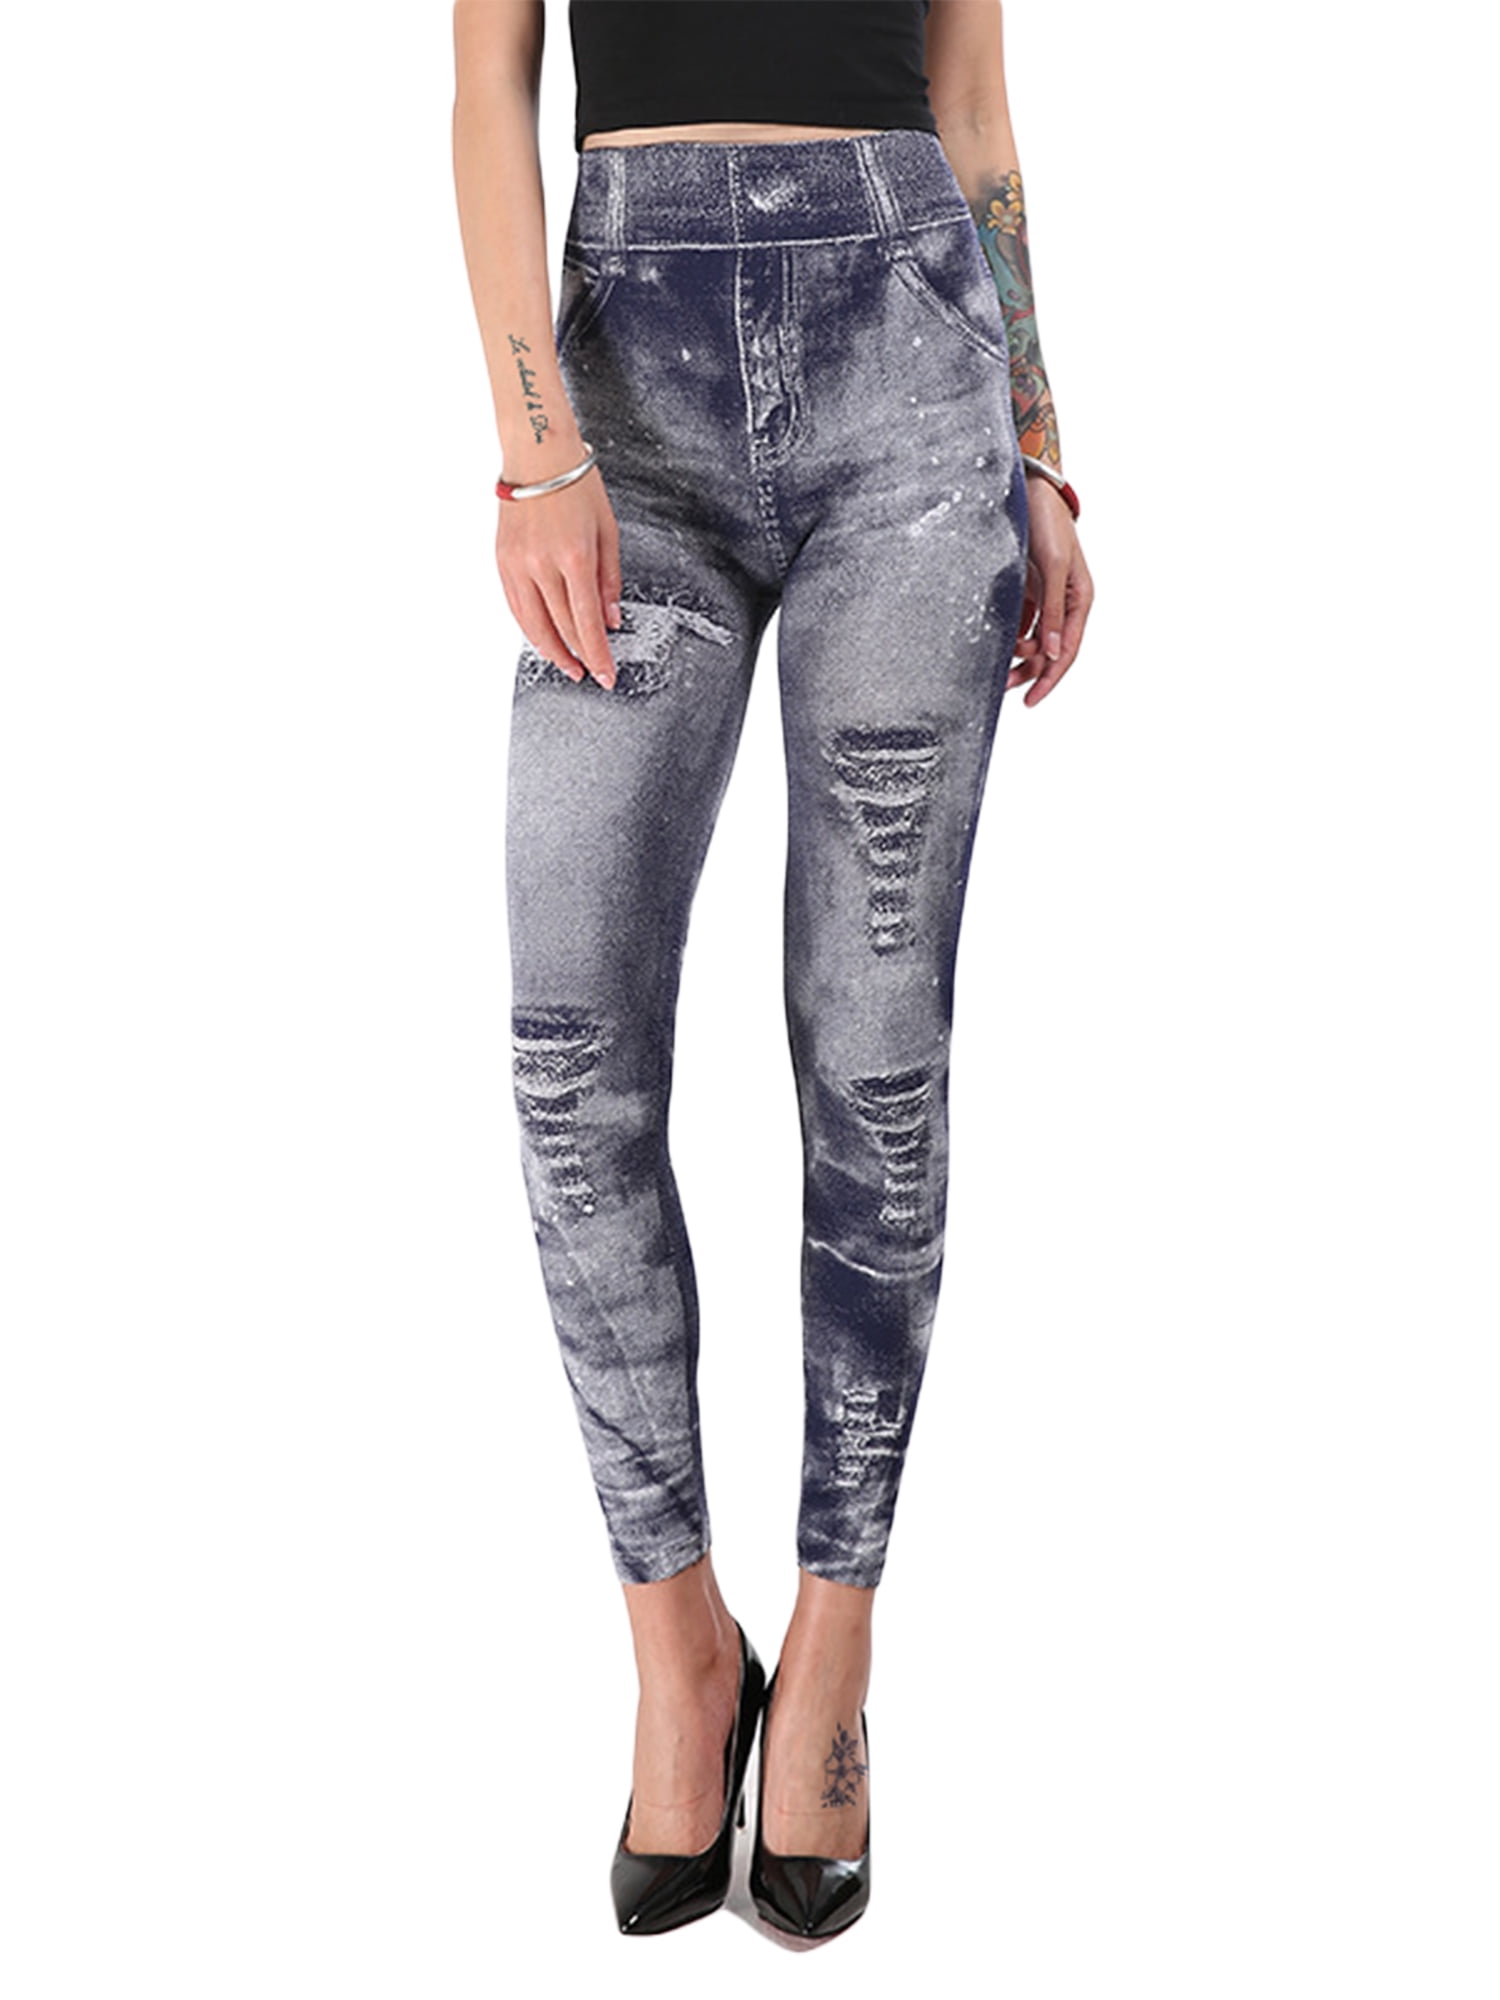 Womens High Waisted Stretchy Skinny Denim Jeans Jeggings Pencil Pants Trousers